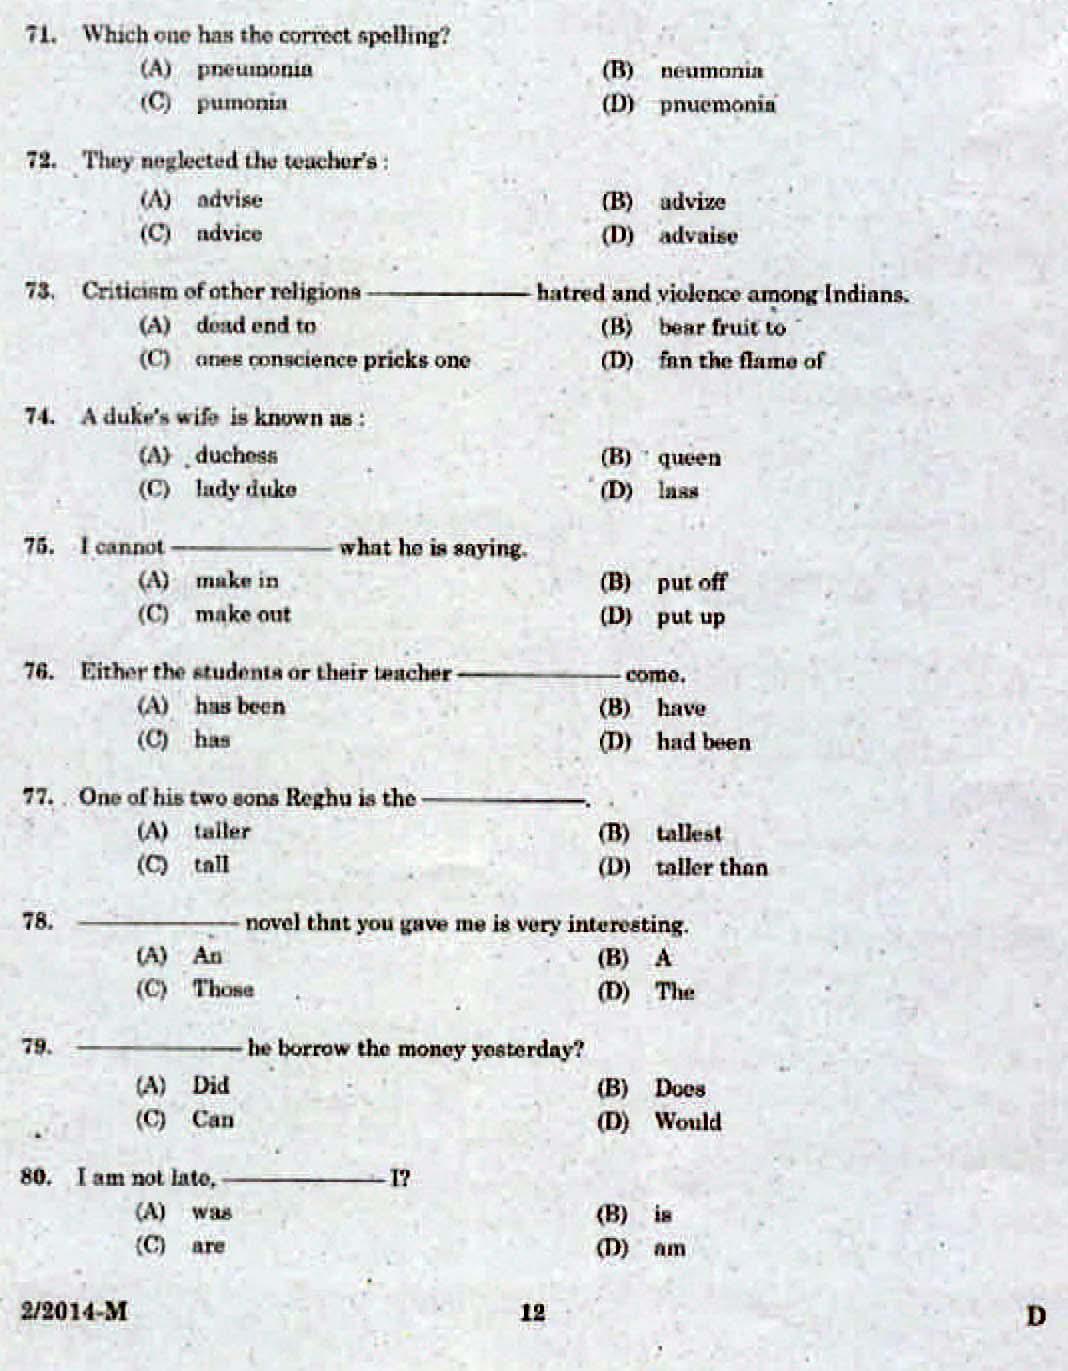 LD Clerk Question Paper Malayalam 2014 Paper Code 022014 M 9